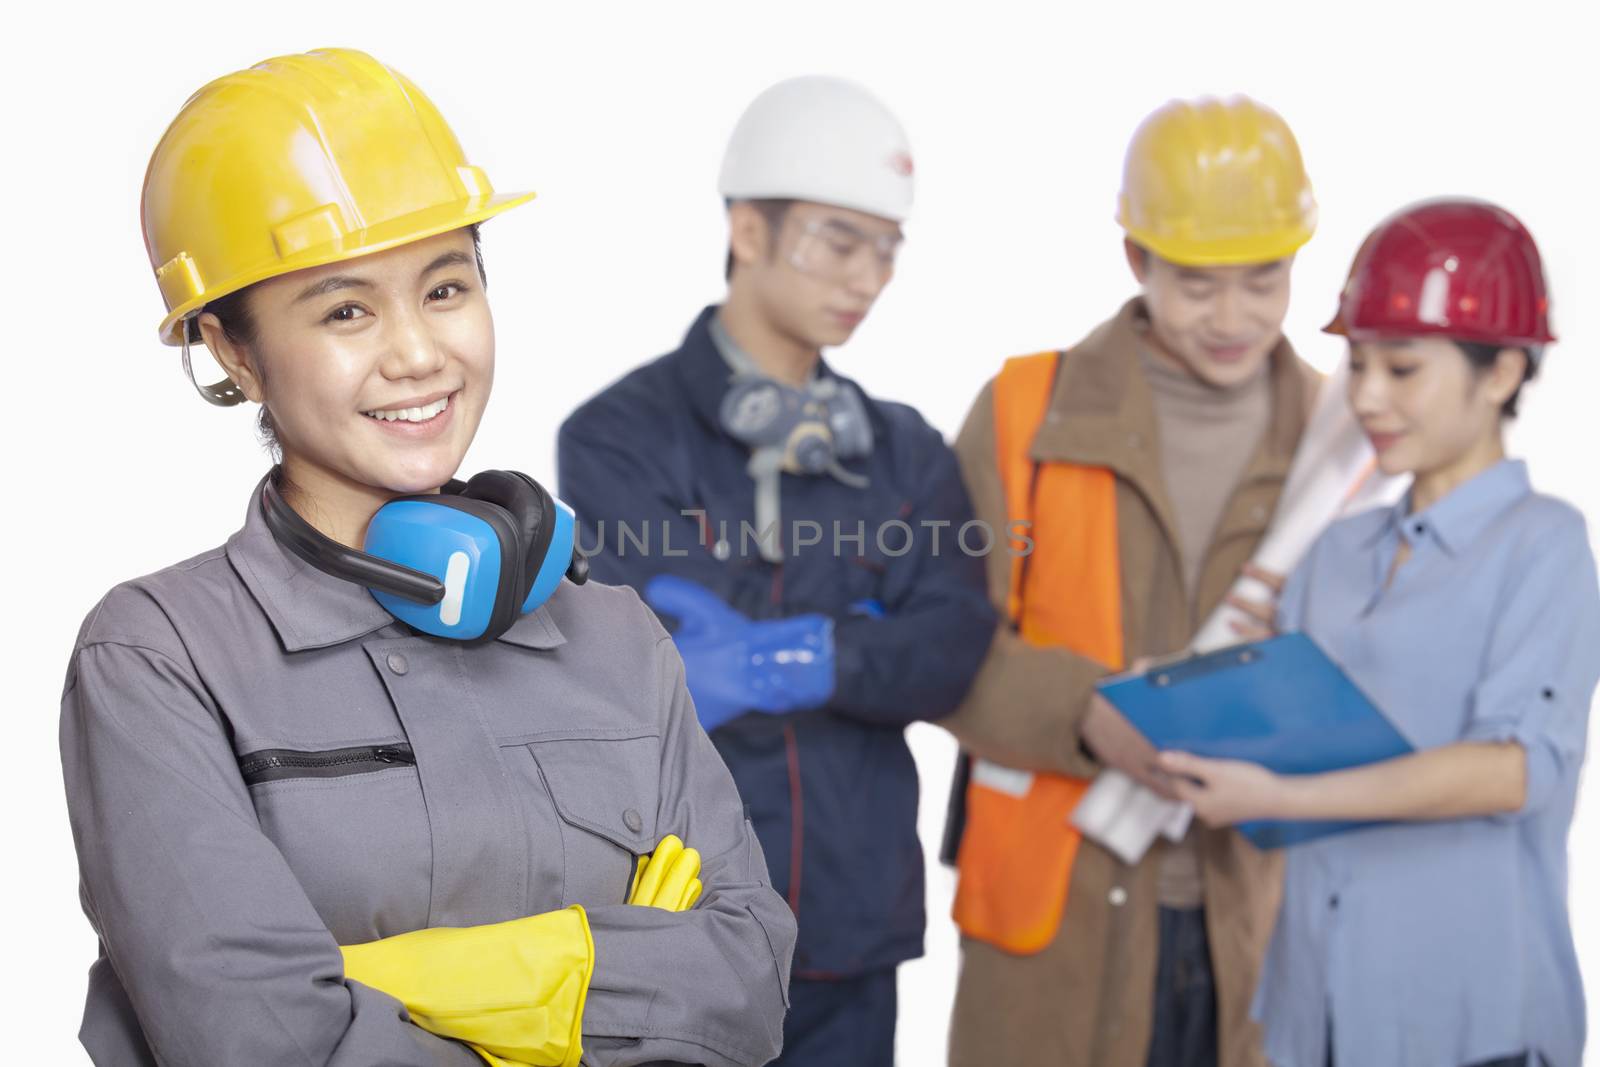 Four construction workers against white background, focus in foreground